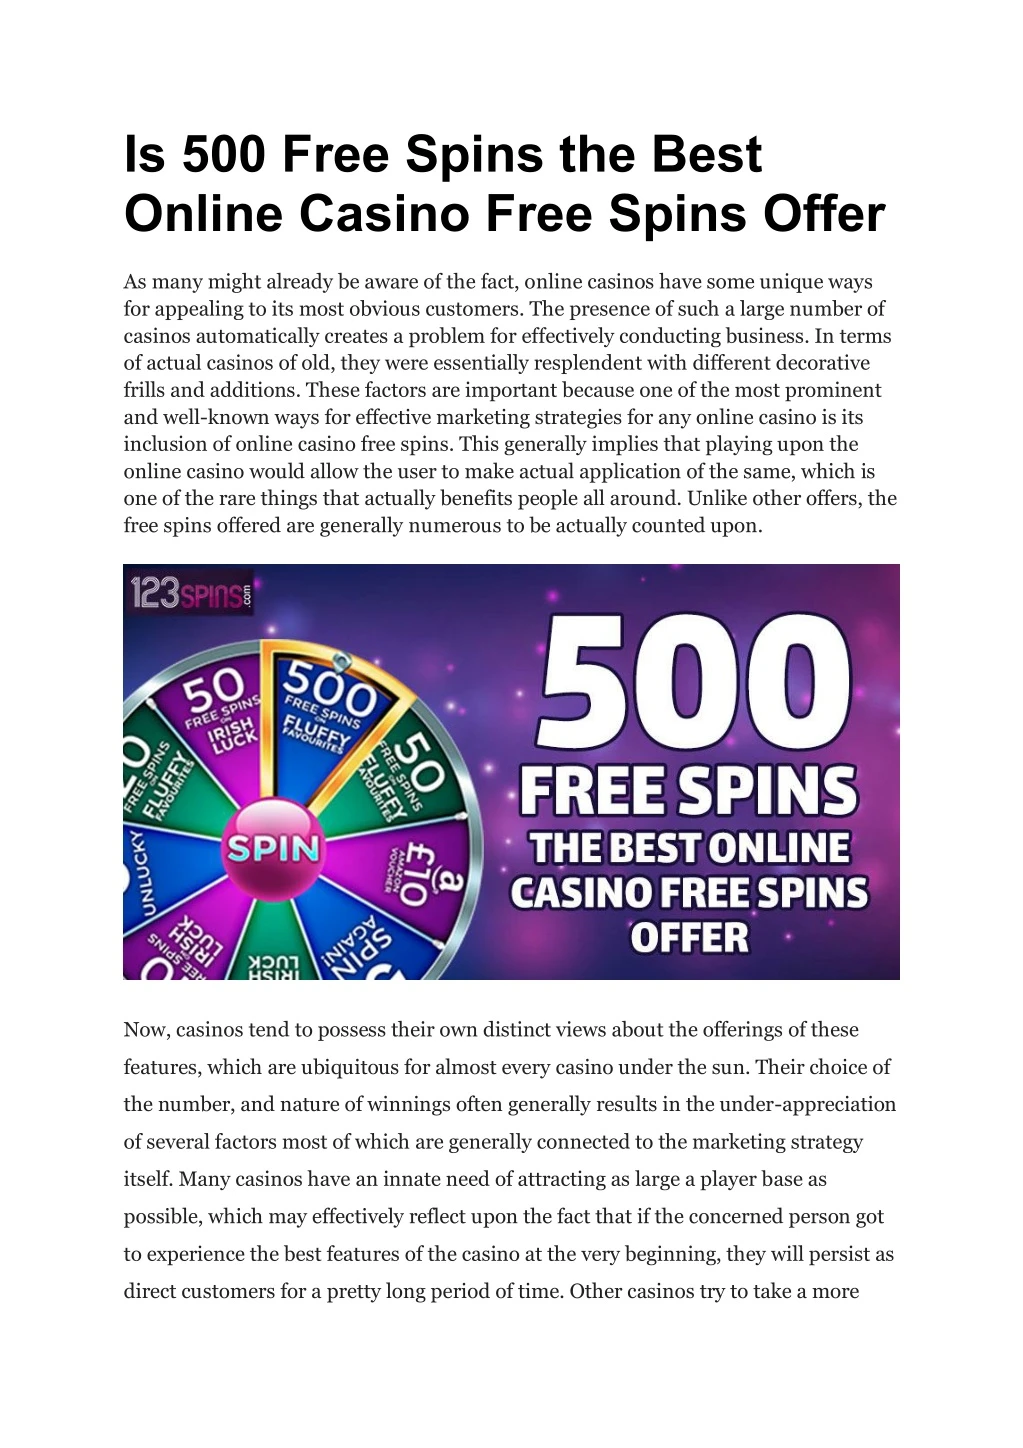 is 500 free spins the best online casino free